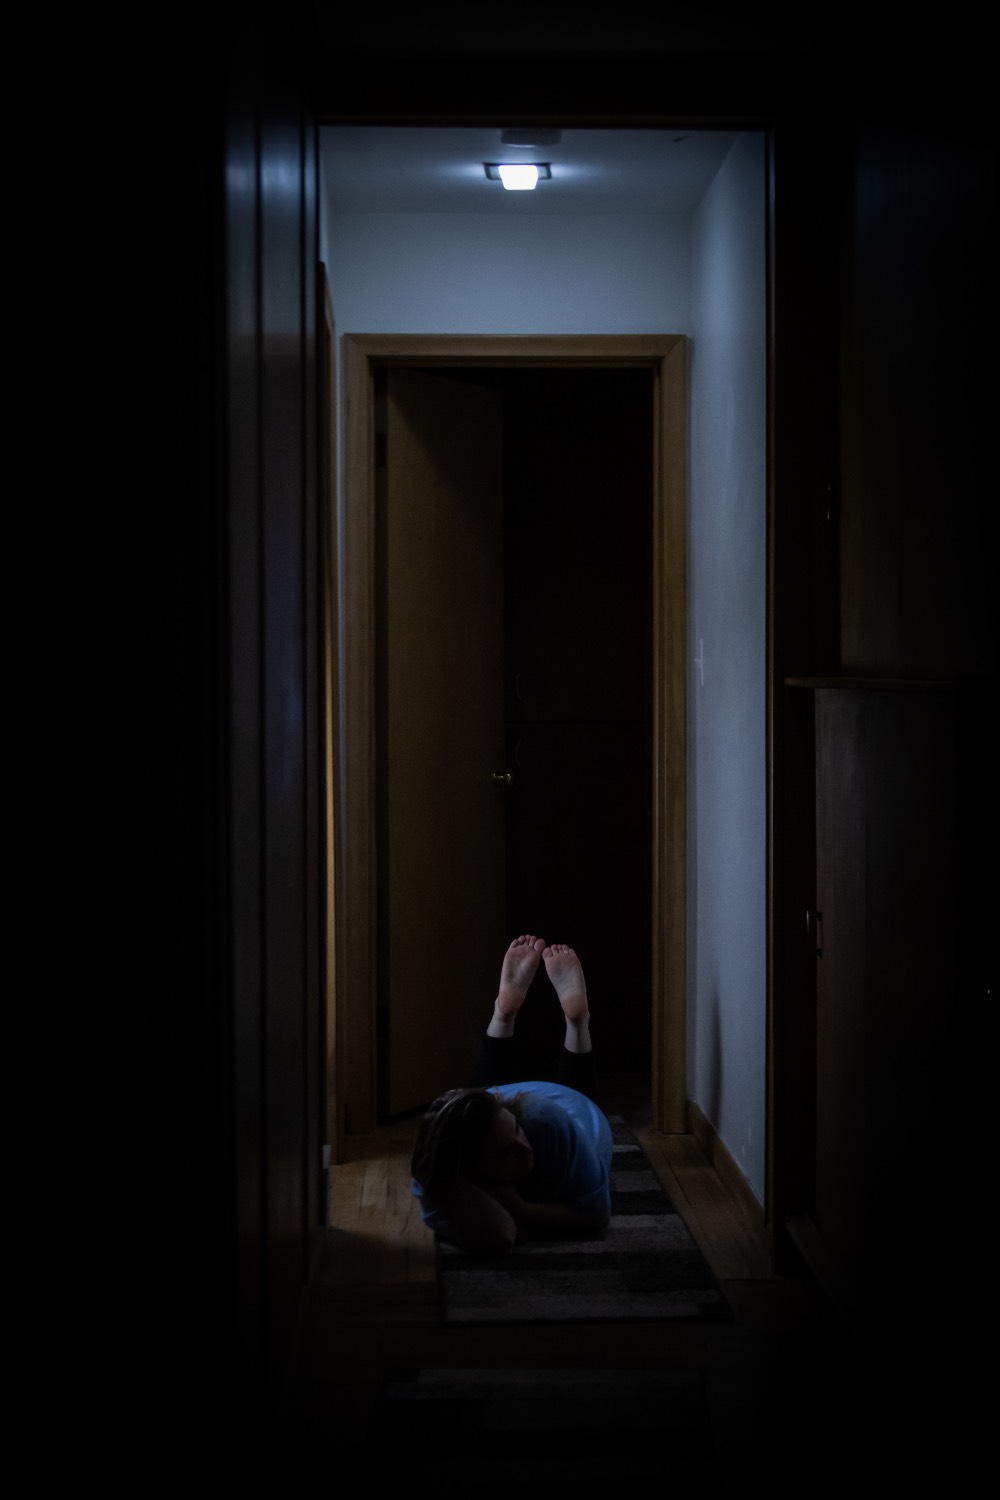 Very dark image of a dimly lit hallway with someone lying down on their stomach